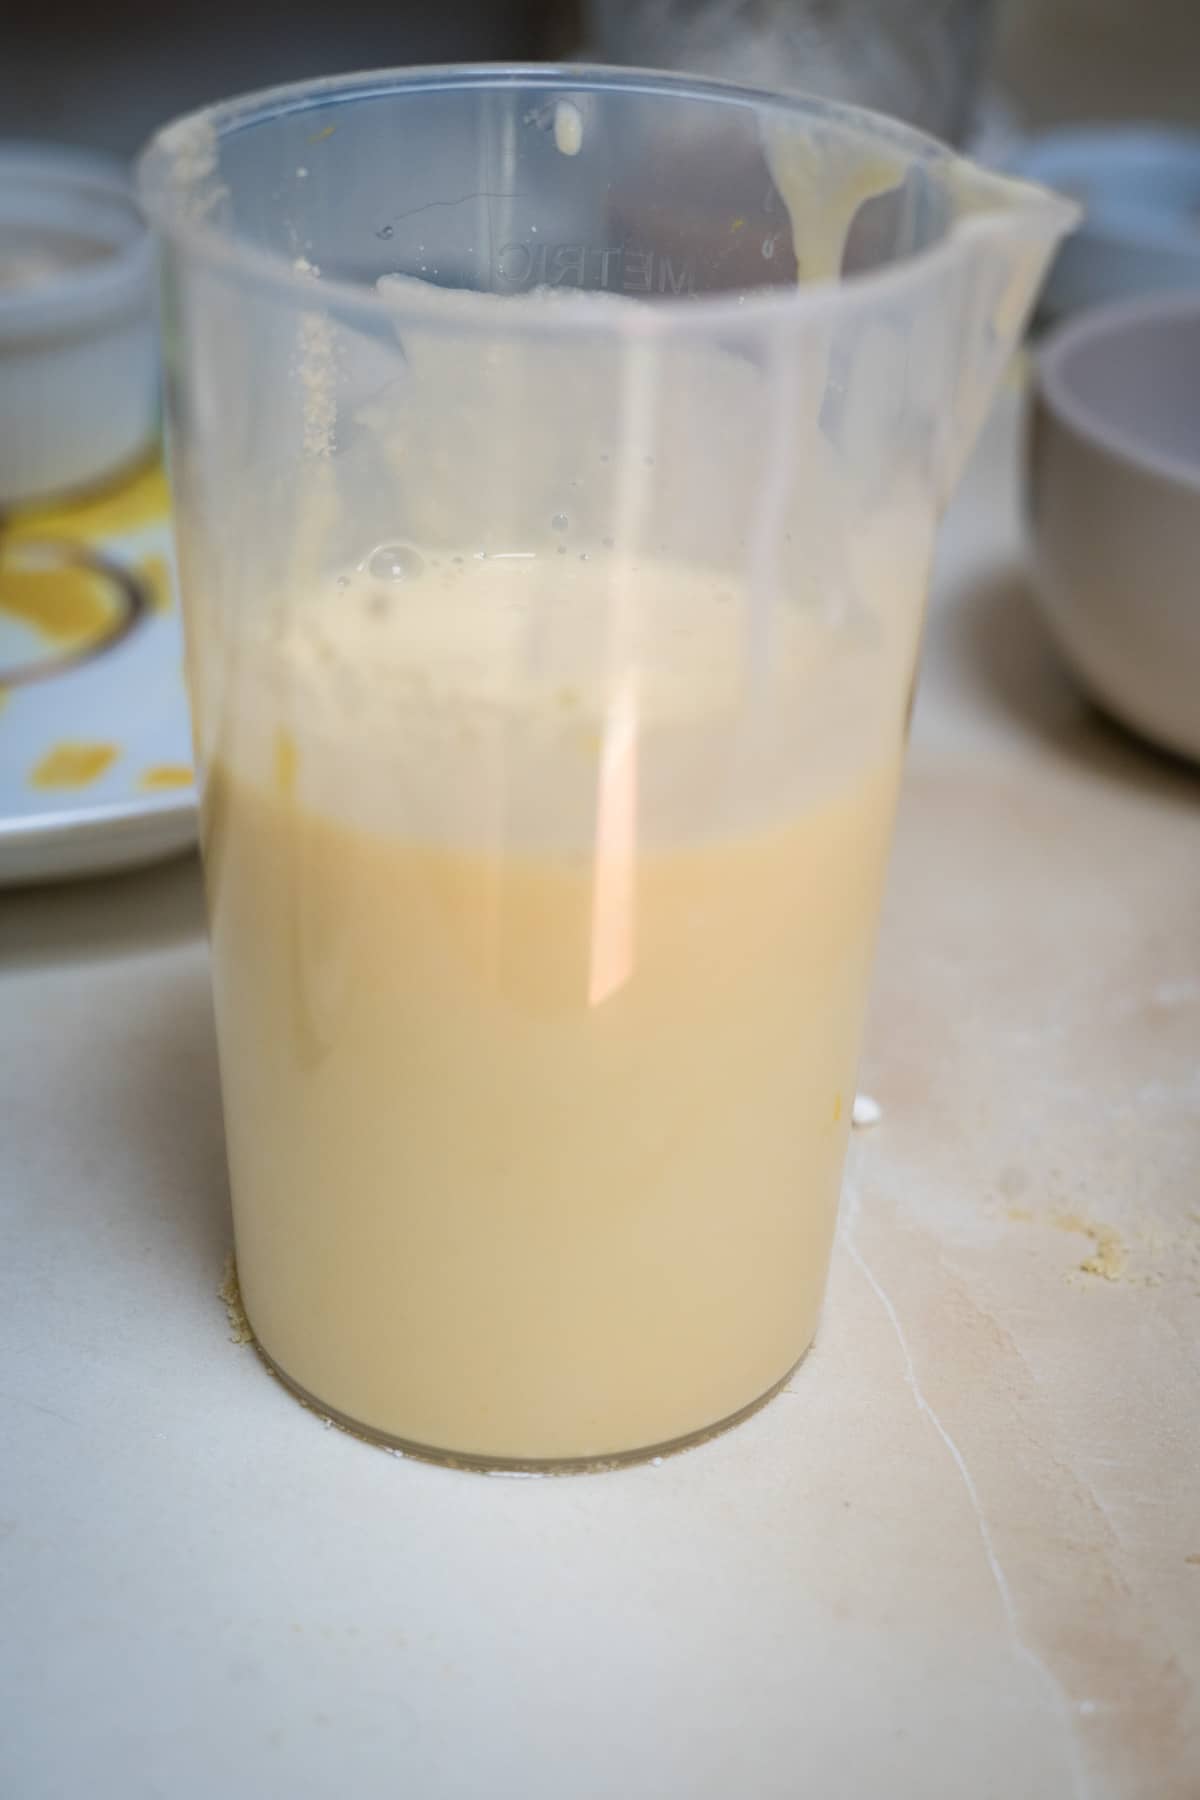 pancake batter in container blended.